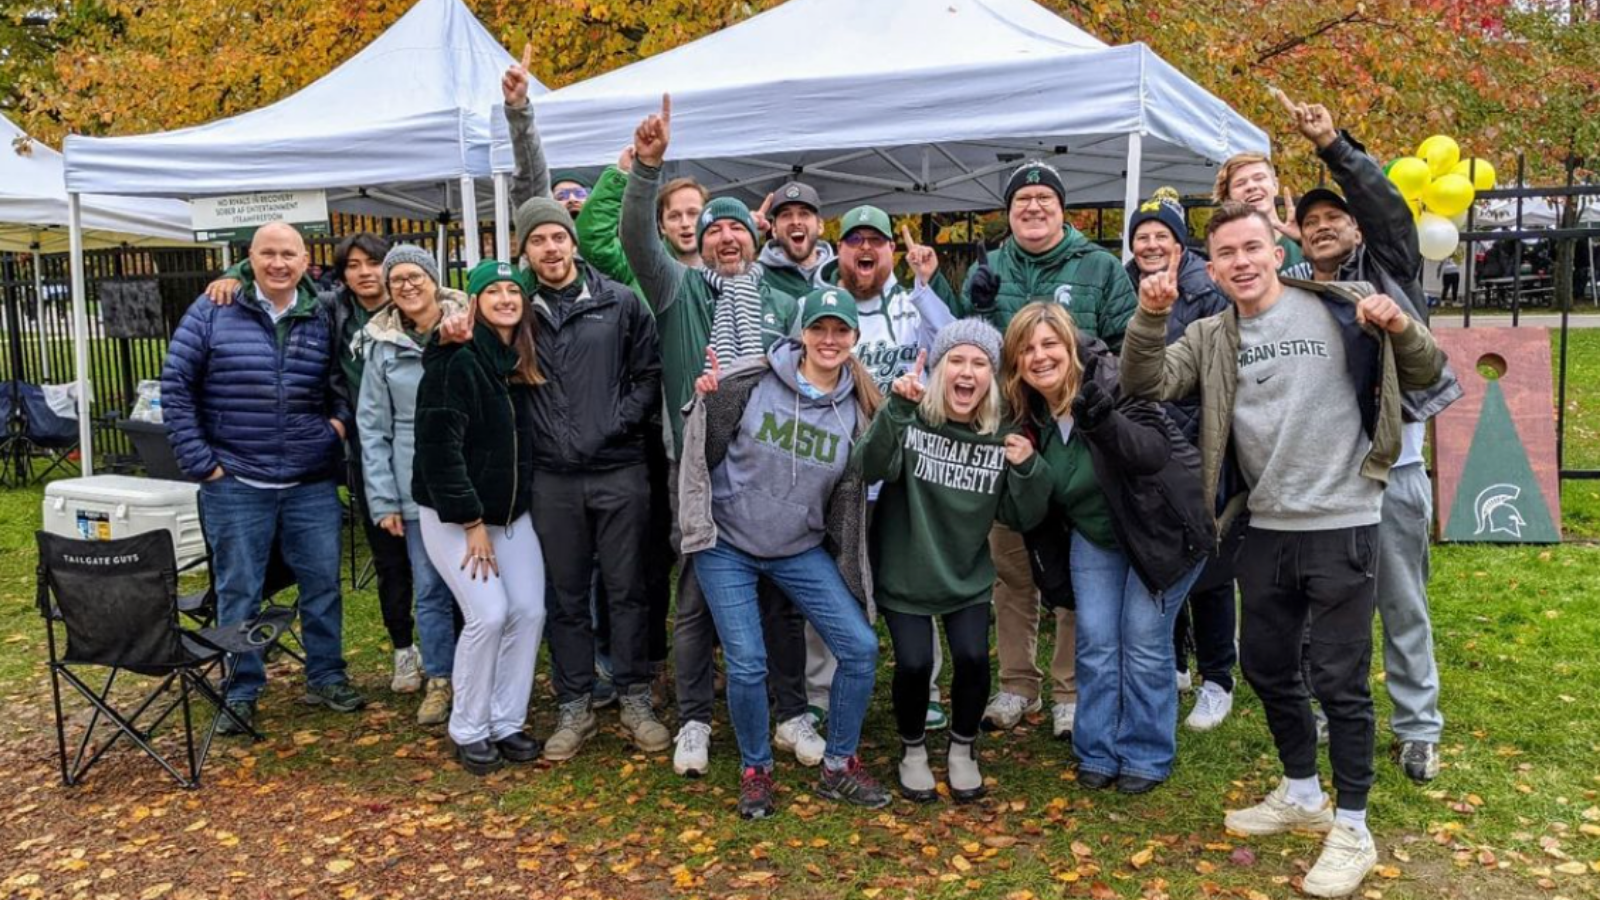 A group of students, staff and alumni enjoying a sober tailgate on a fall day.